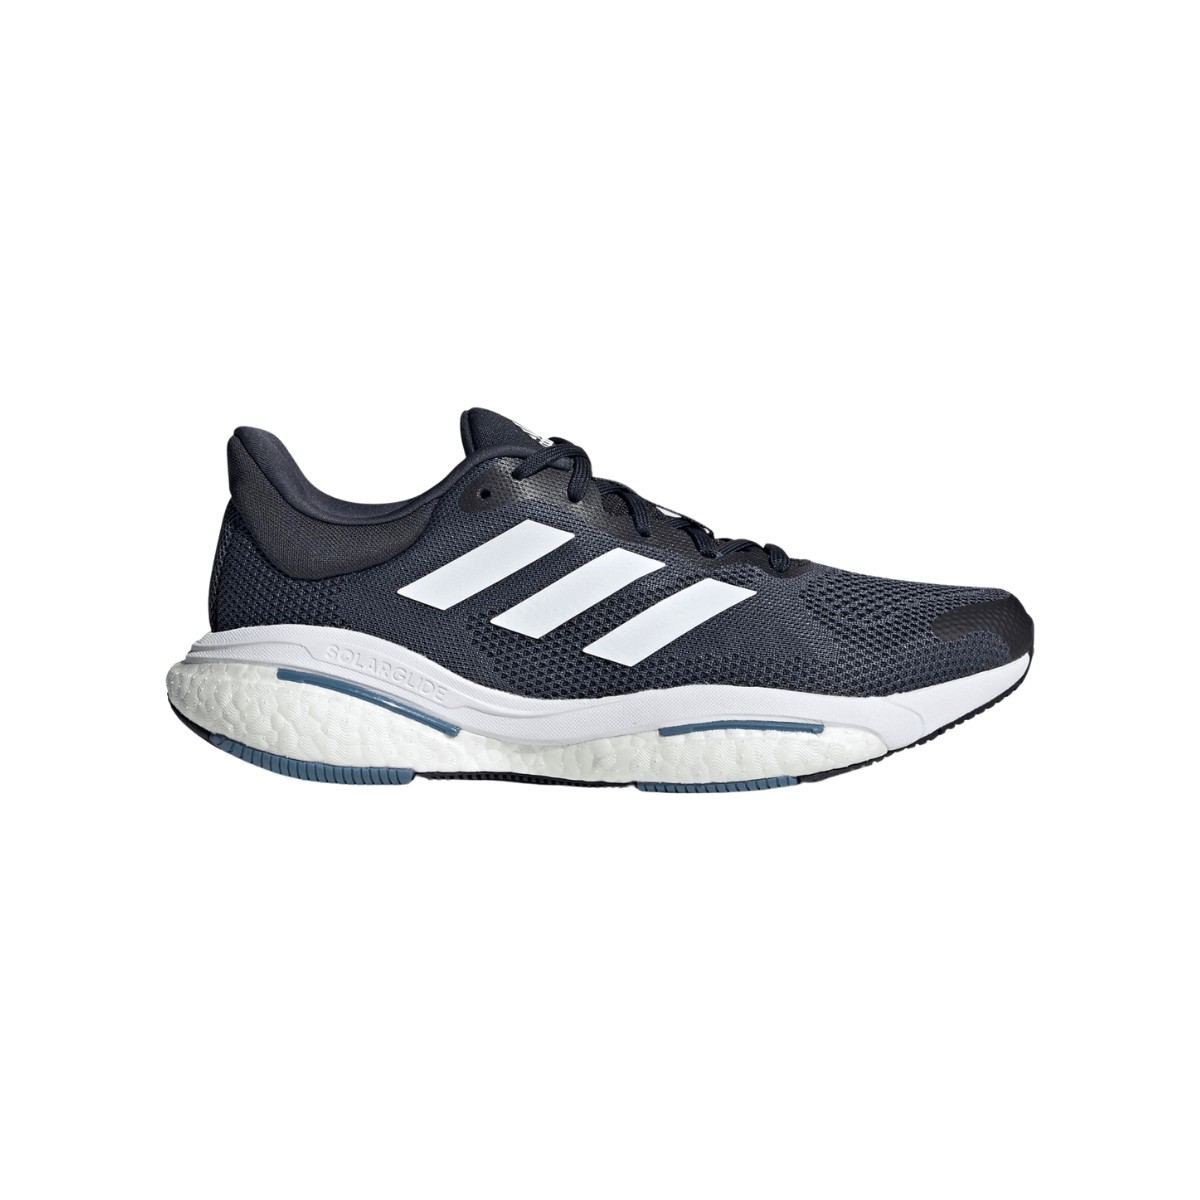 Adidas Solar Glide 5 M Shoes Navy White SS22, Size UK 8